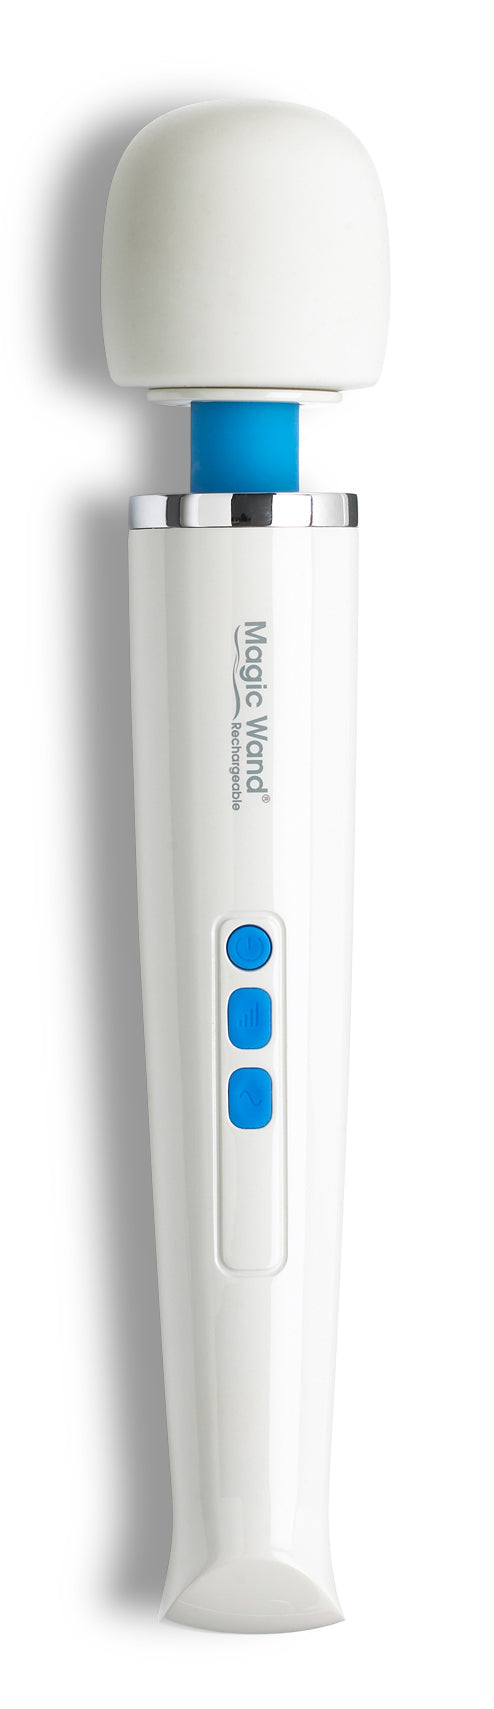 Magic Wand Rechargeable Personal Massager - UABDSM